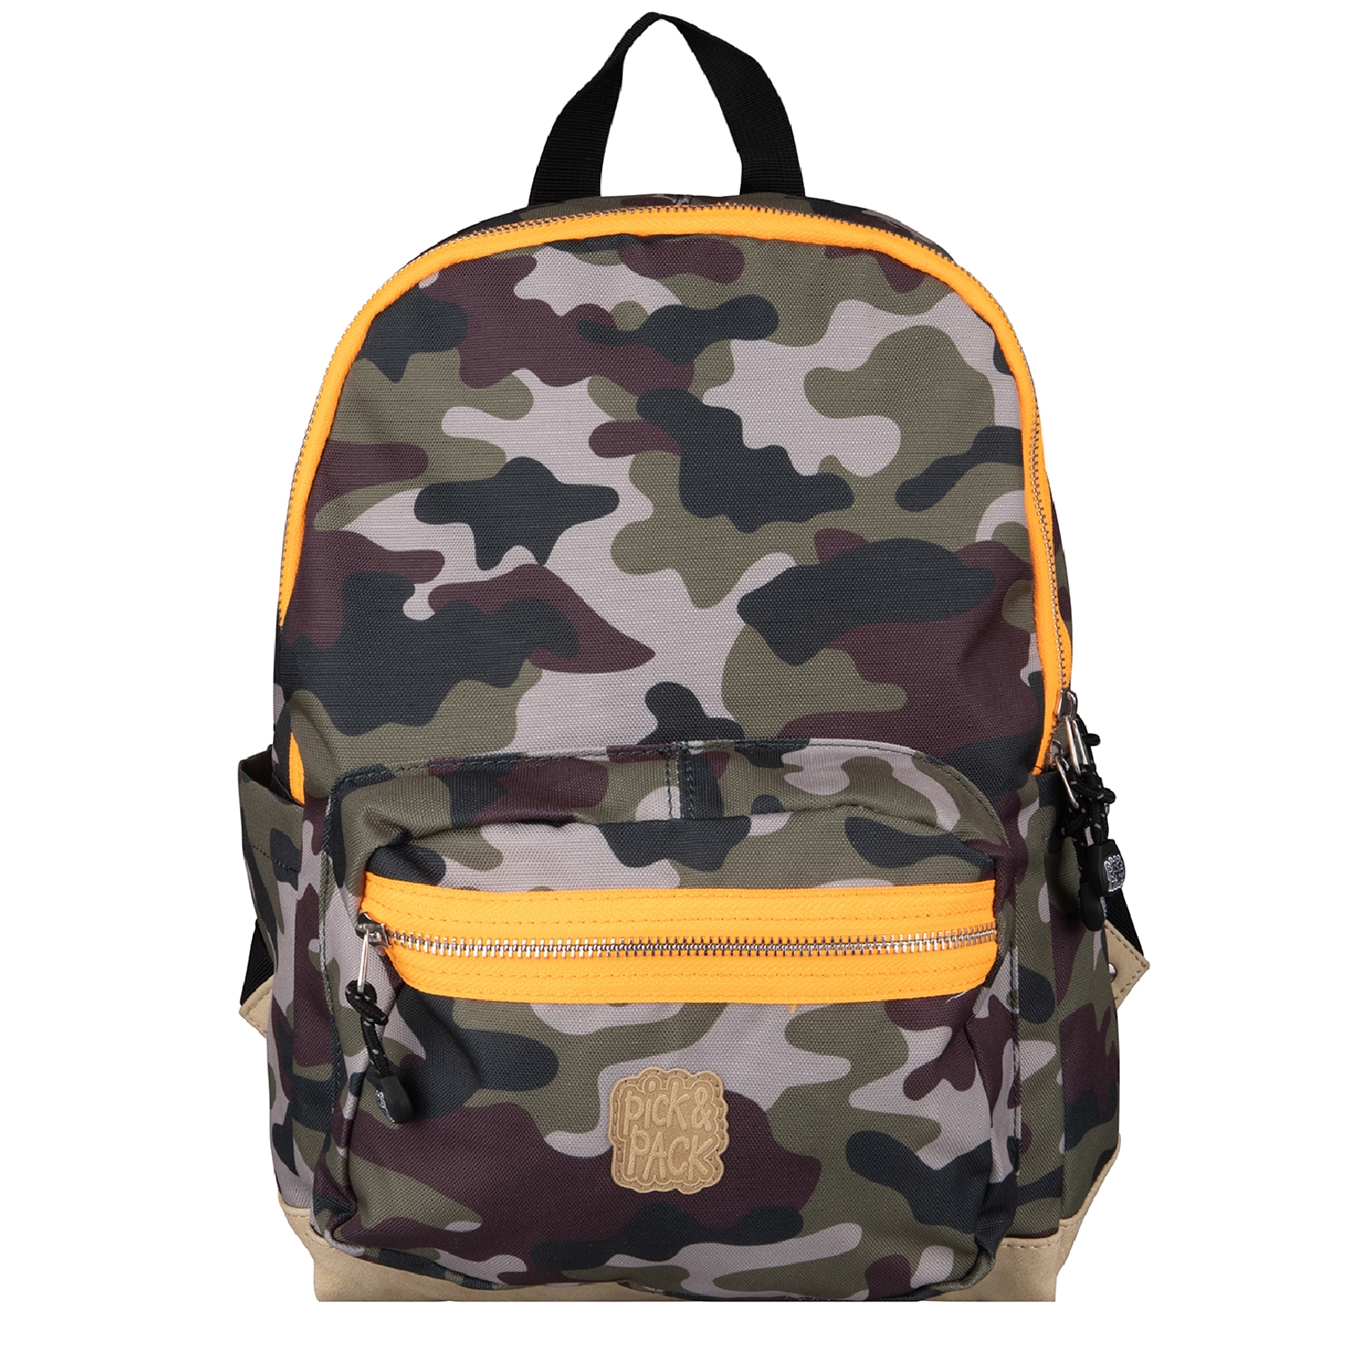 Pick & Pack Camo Backpack L camo green